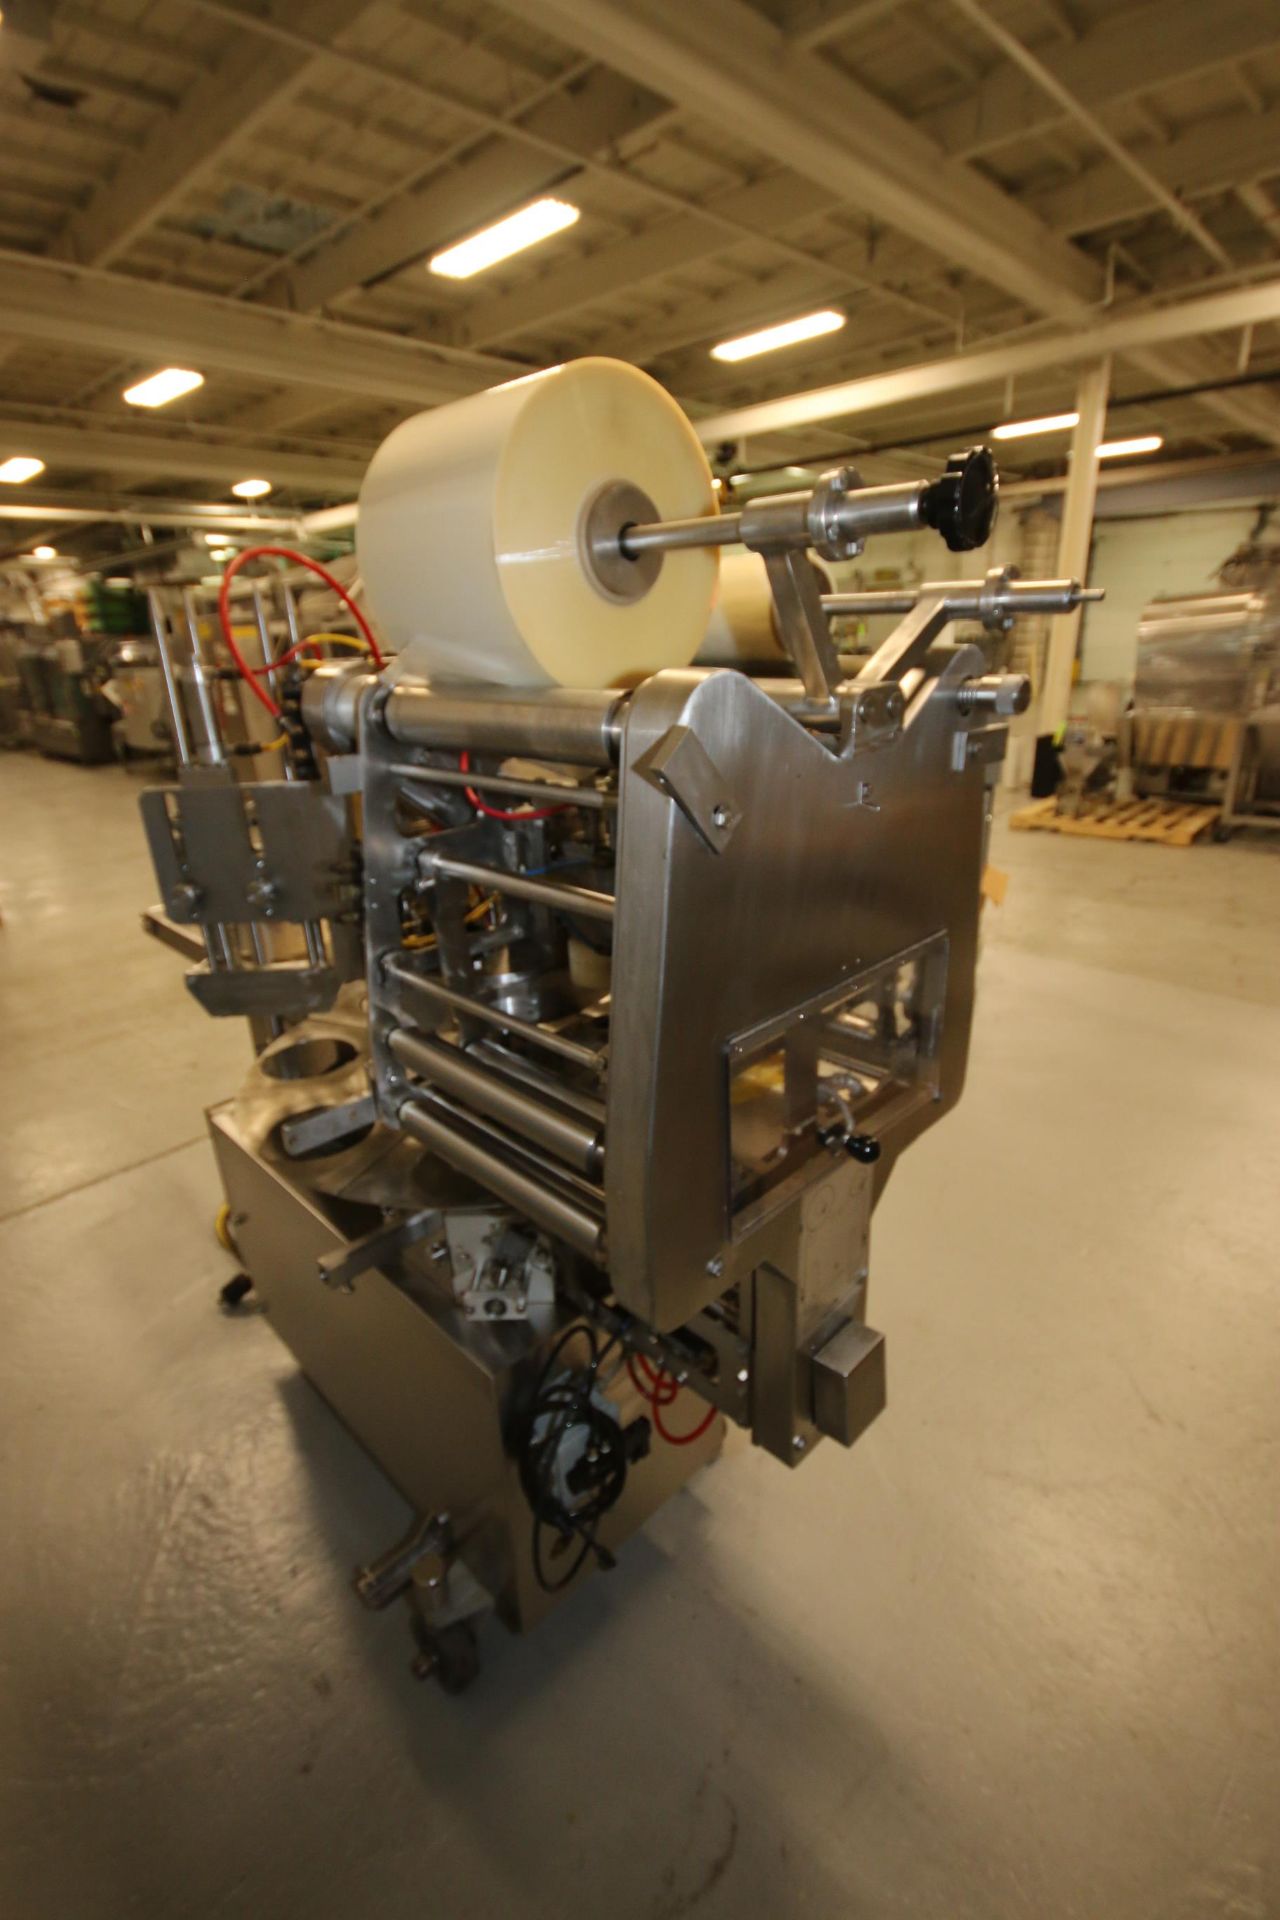 Sweetheart Cup. Co. / Flexefill 8 - Station Rotary S/S Cup Sealer, S/N 23-02, Set - Up with 5.5" - Image 6 of 12